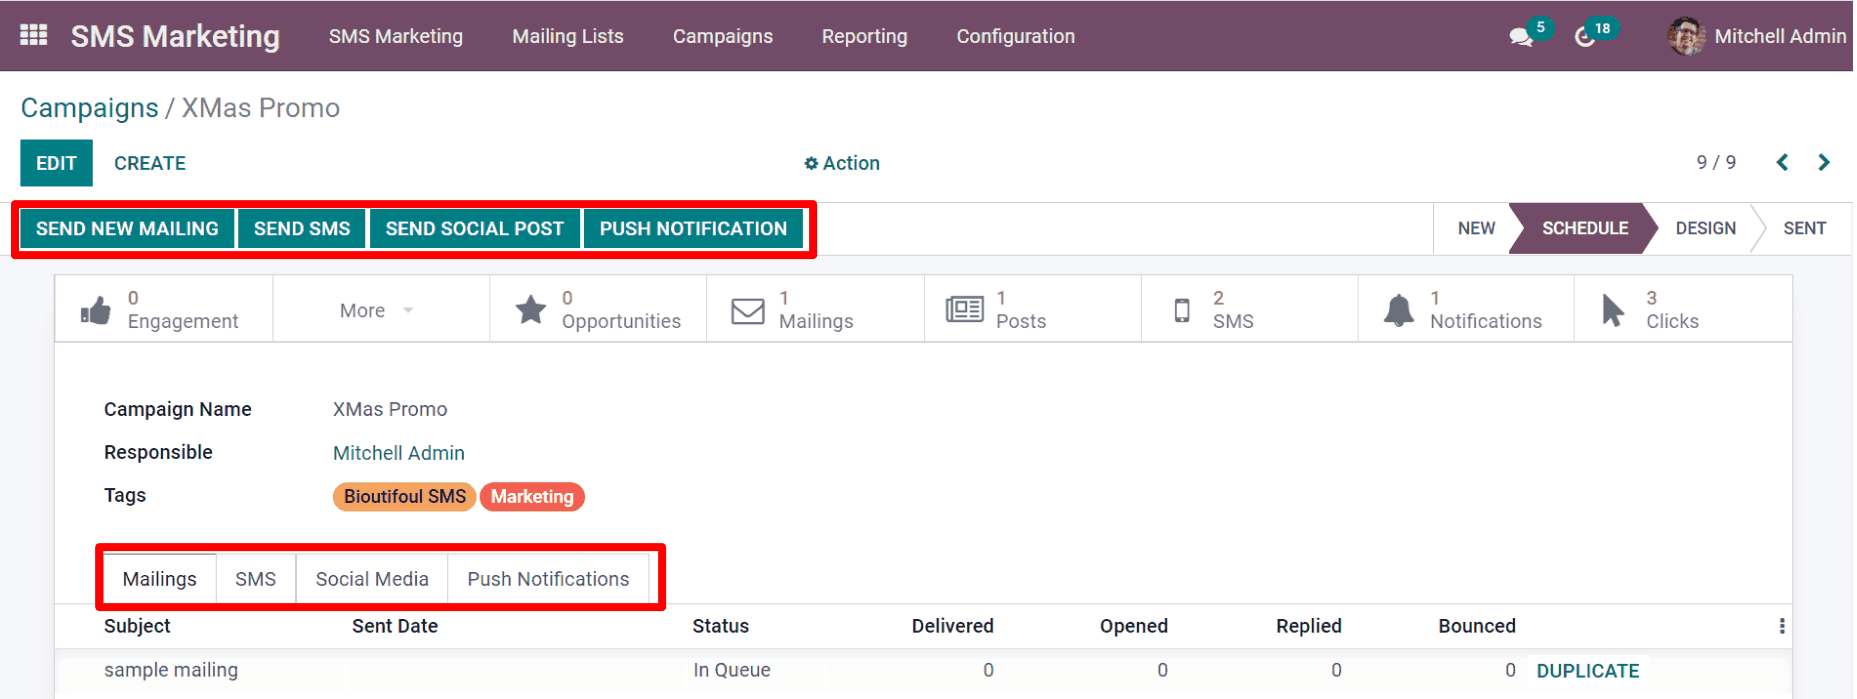 View of an SMS campaign template in Odoo SMS marketing.